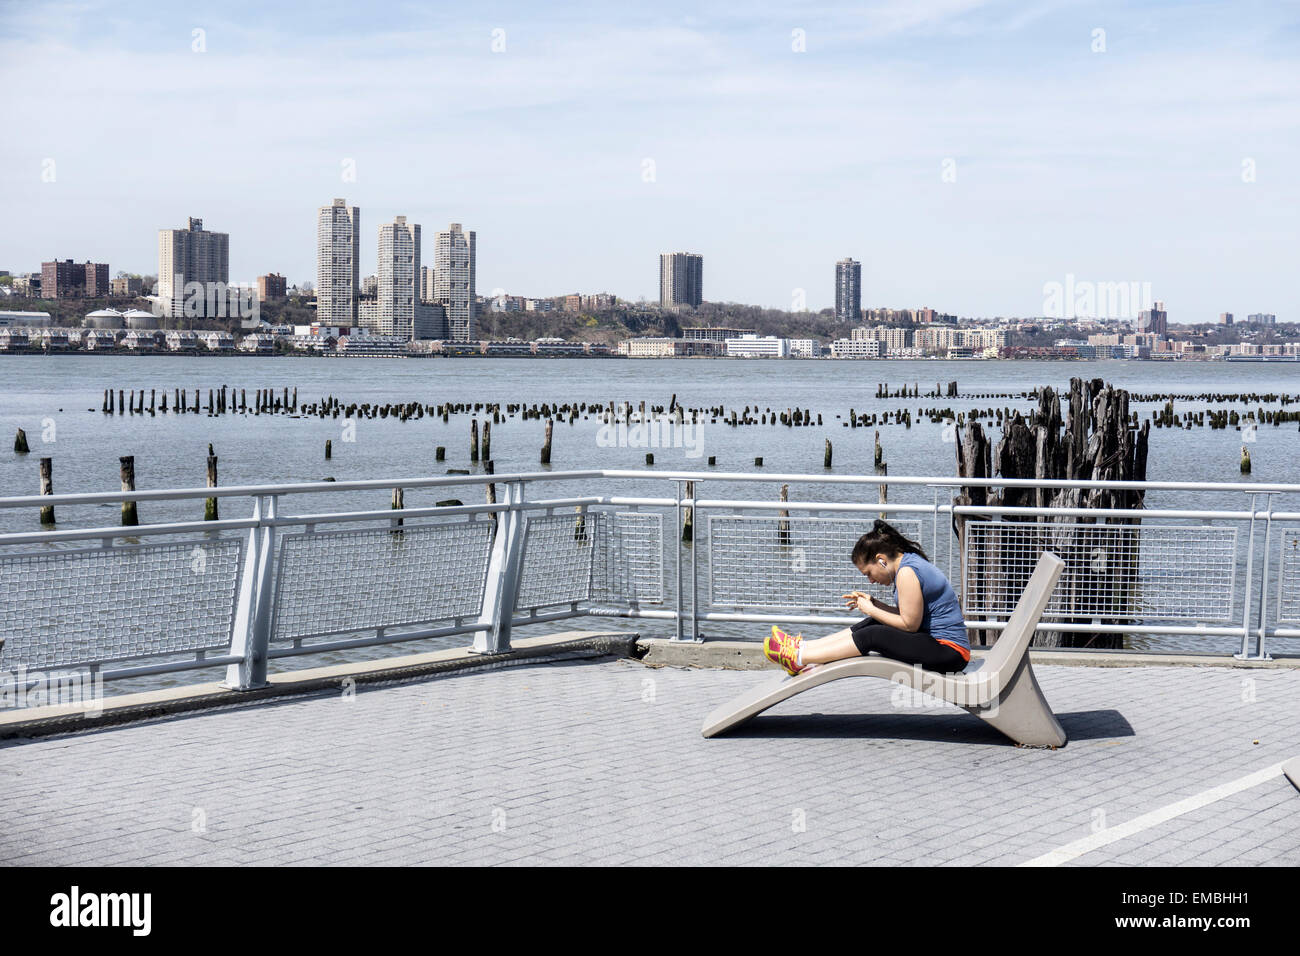 New York City, USA. Sunday April 19, 2015, USA; woman enjoys spring Sunday sitting on permanent outdoor chaise longue with panoramic view of Hudson River, picturesque old pier pilings & New Jersey Palisades Credit:  Dorothy Alexander/Alamy Live News Stock Photo